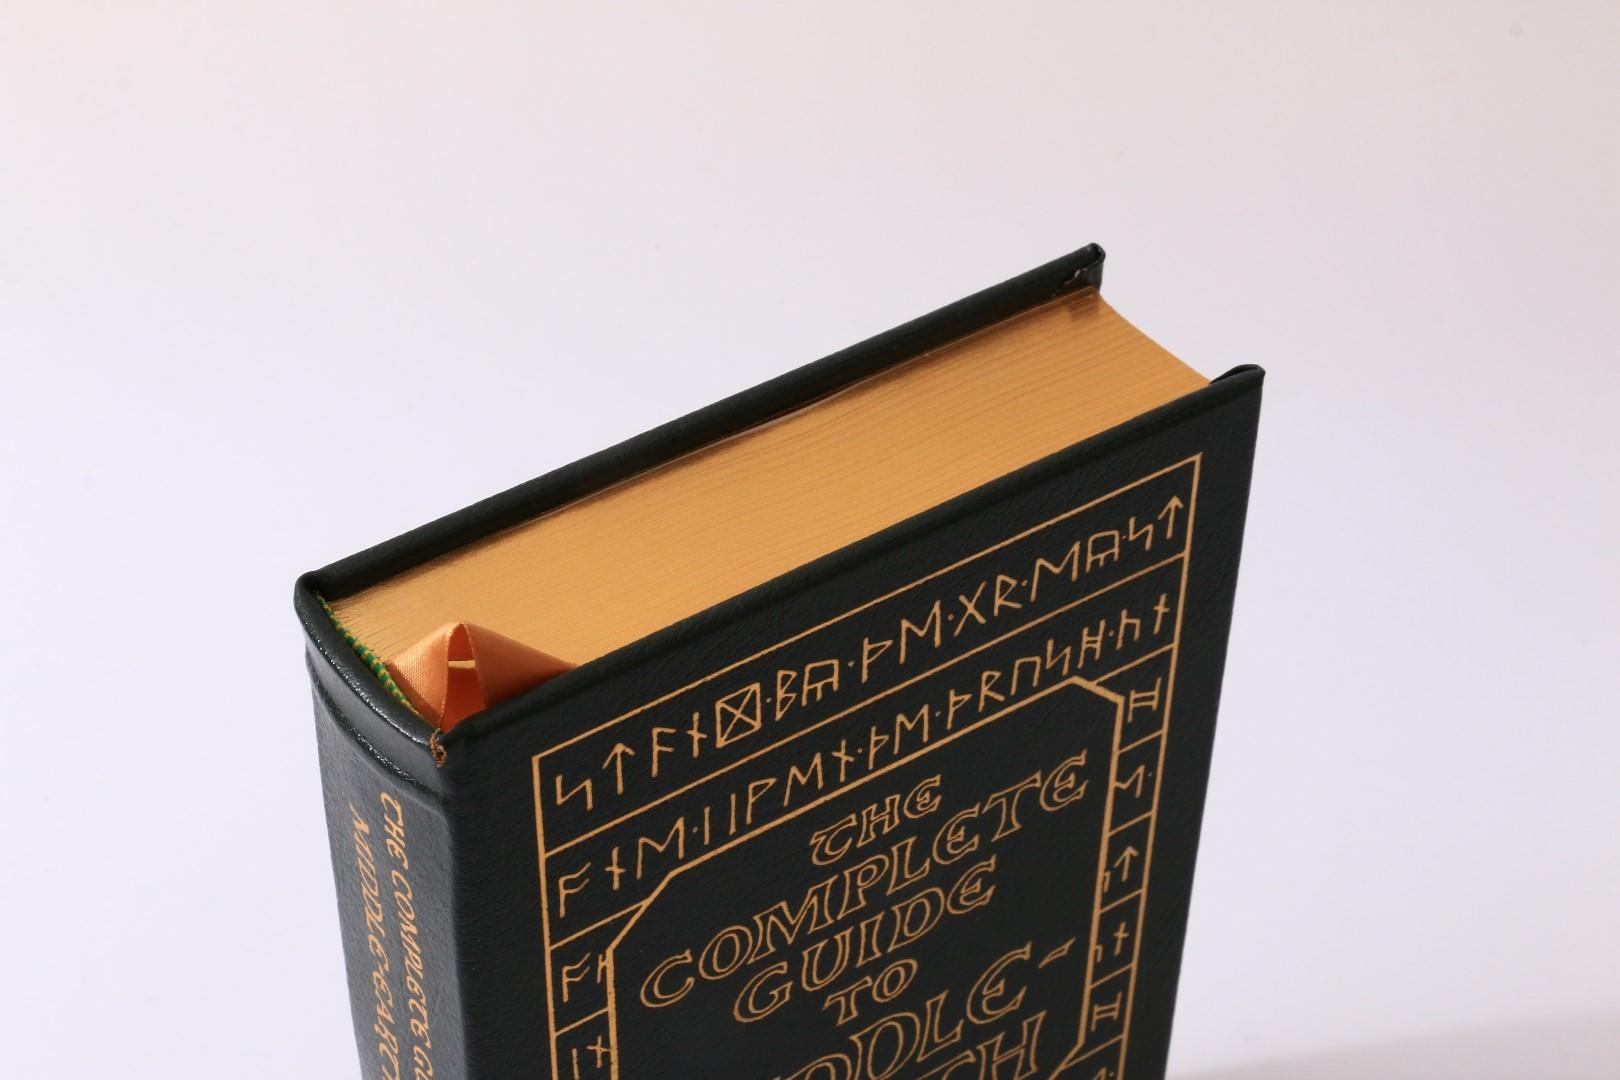 Robert Foster [Tolkien Interest] - The Complete Guide to Middle-Earth - Easton Press, 2003, First Thus.